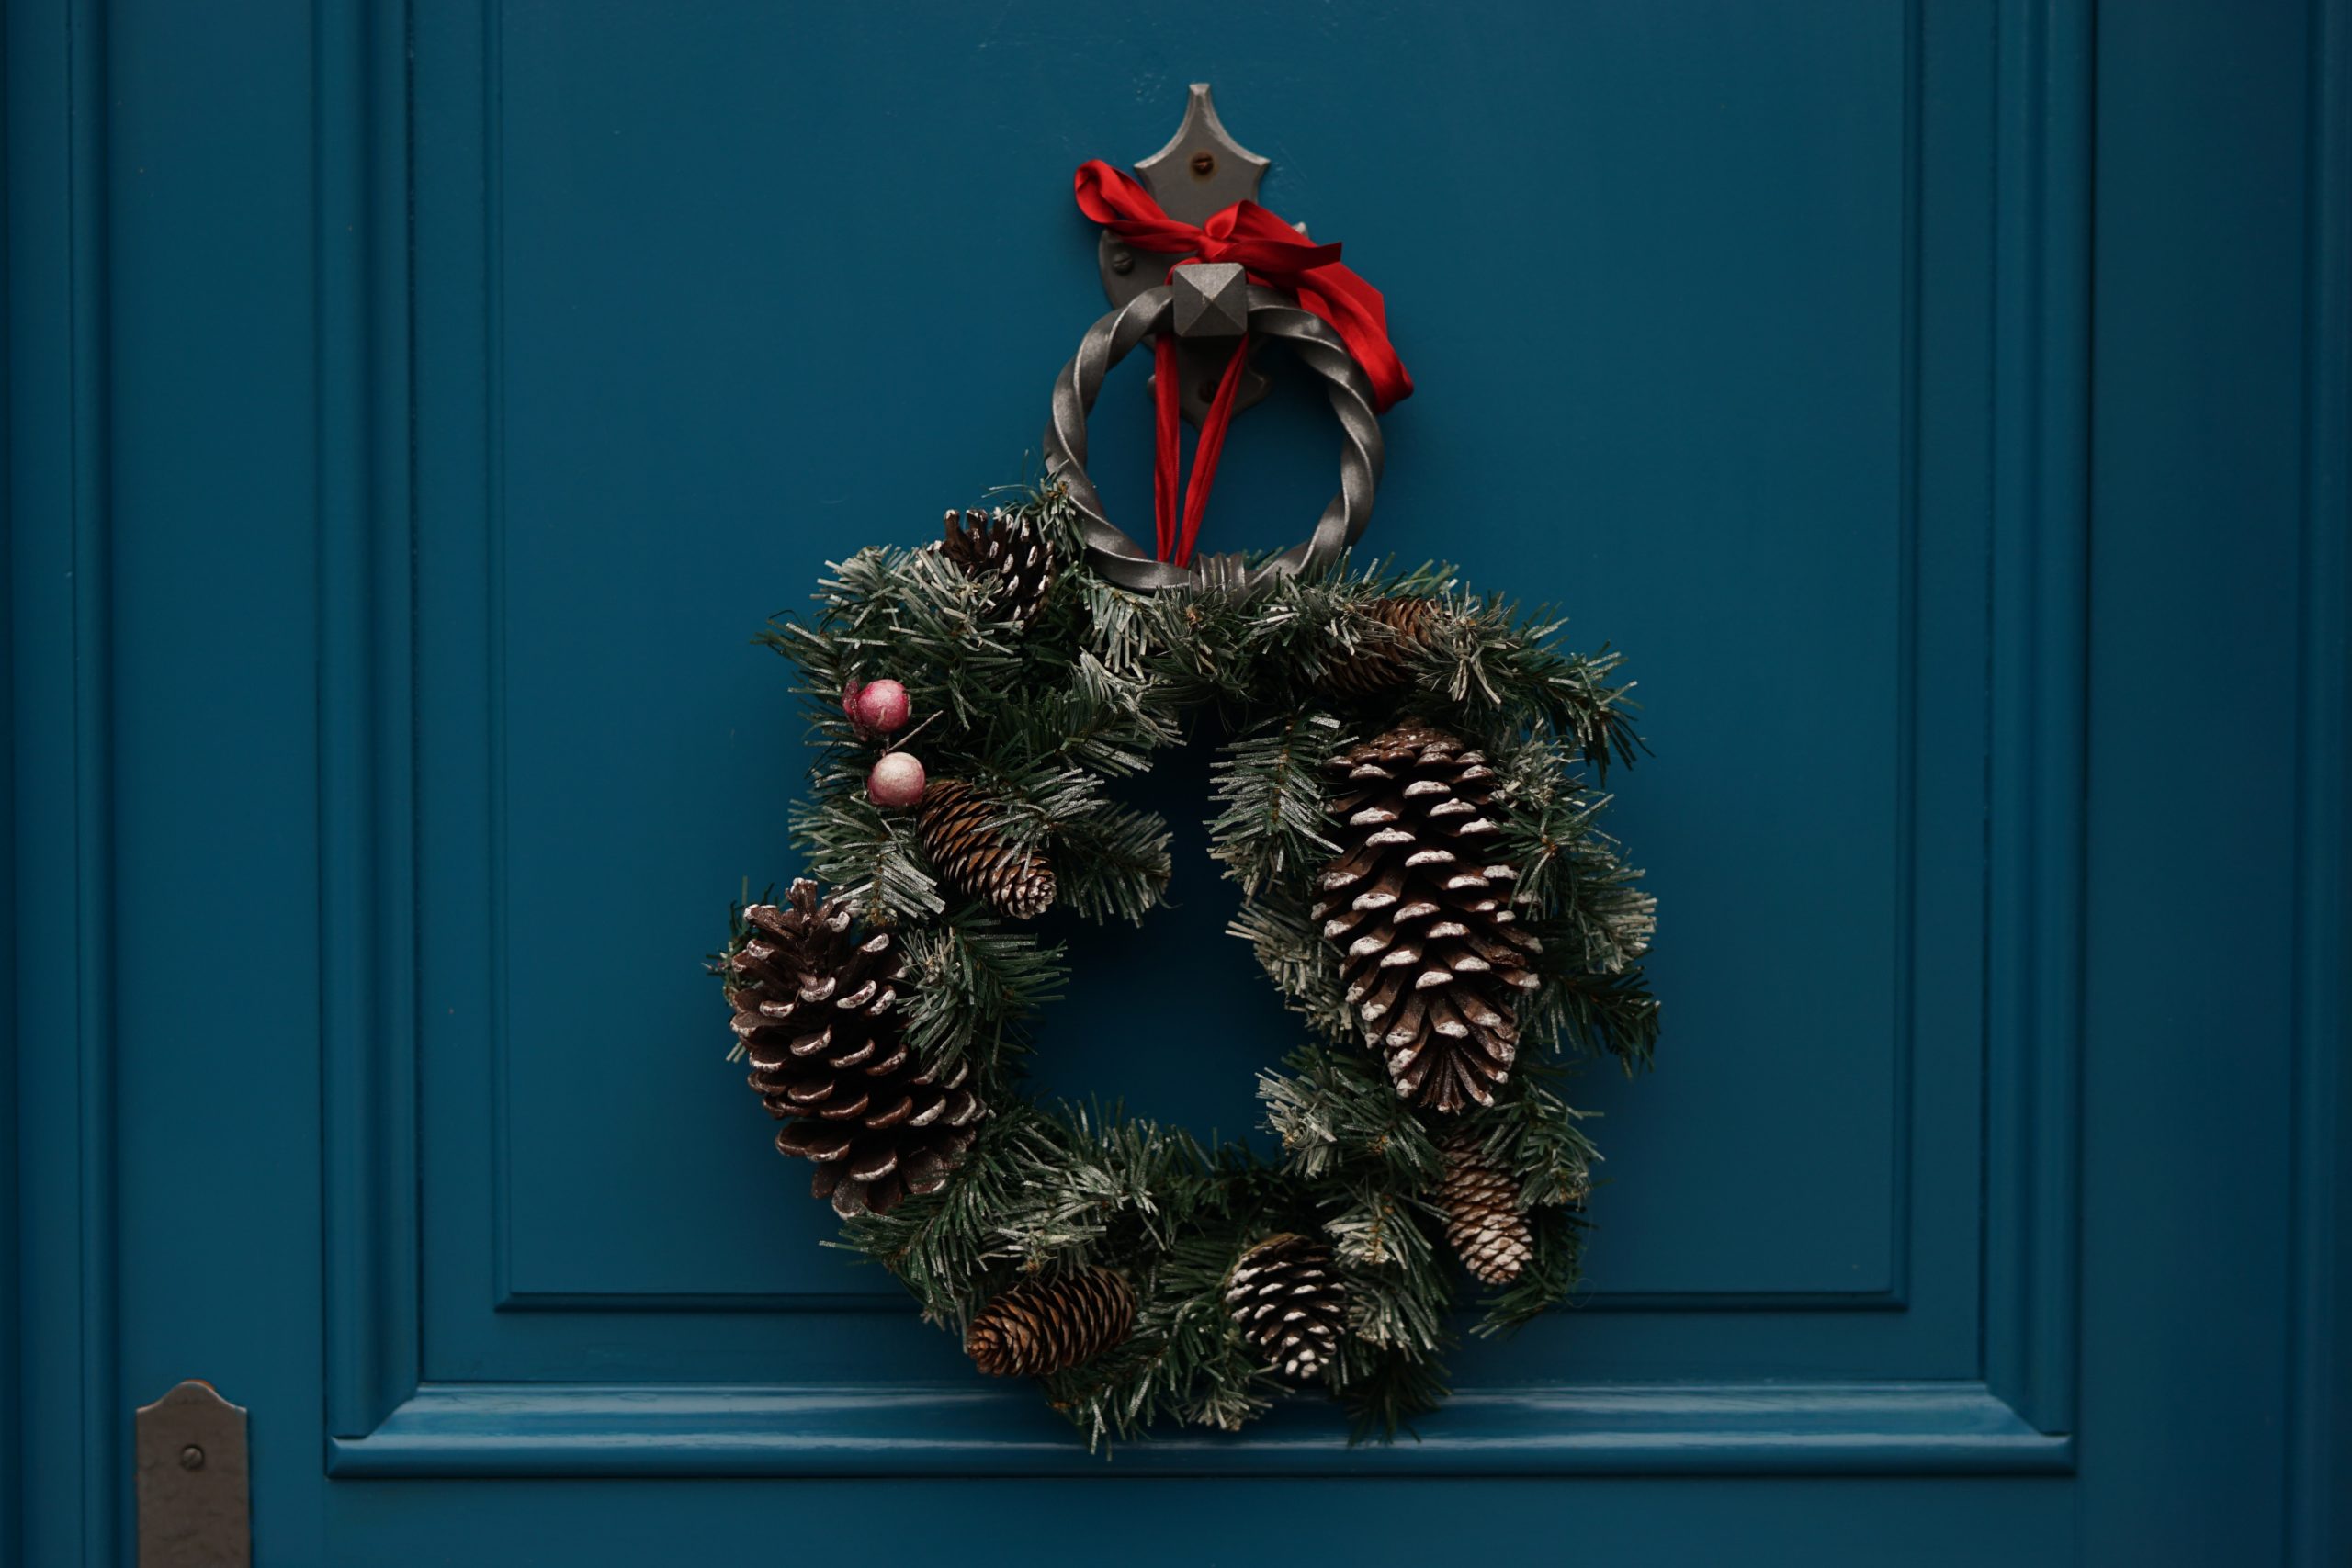 A Christmas wreath hanging on a teal door.